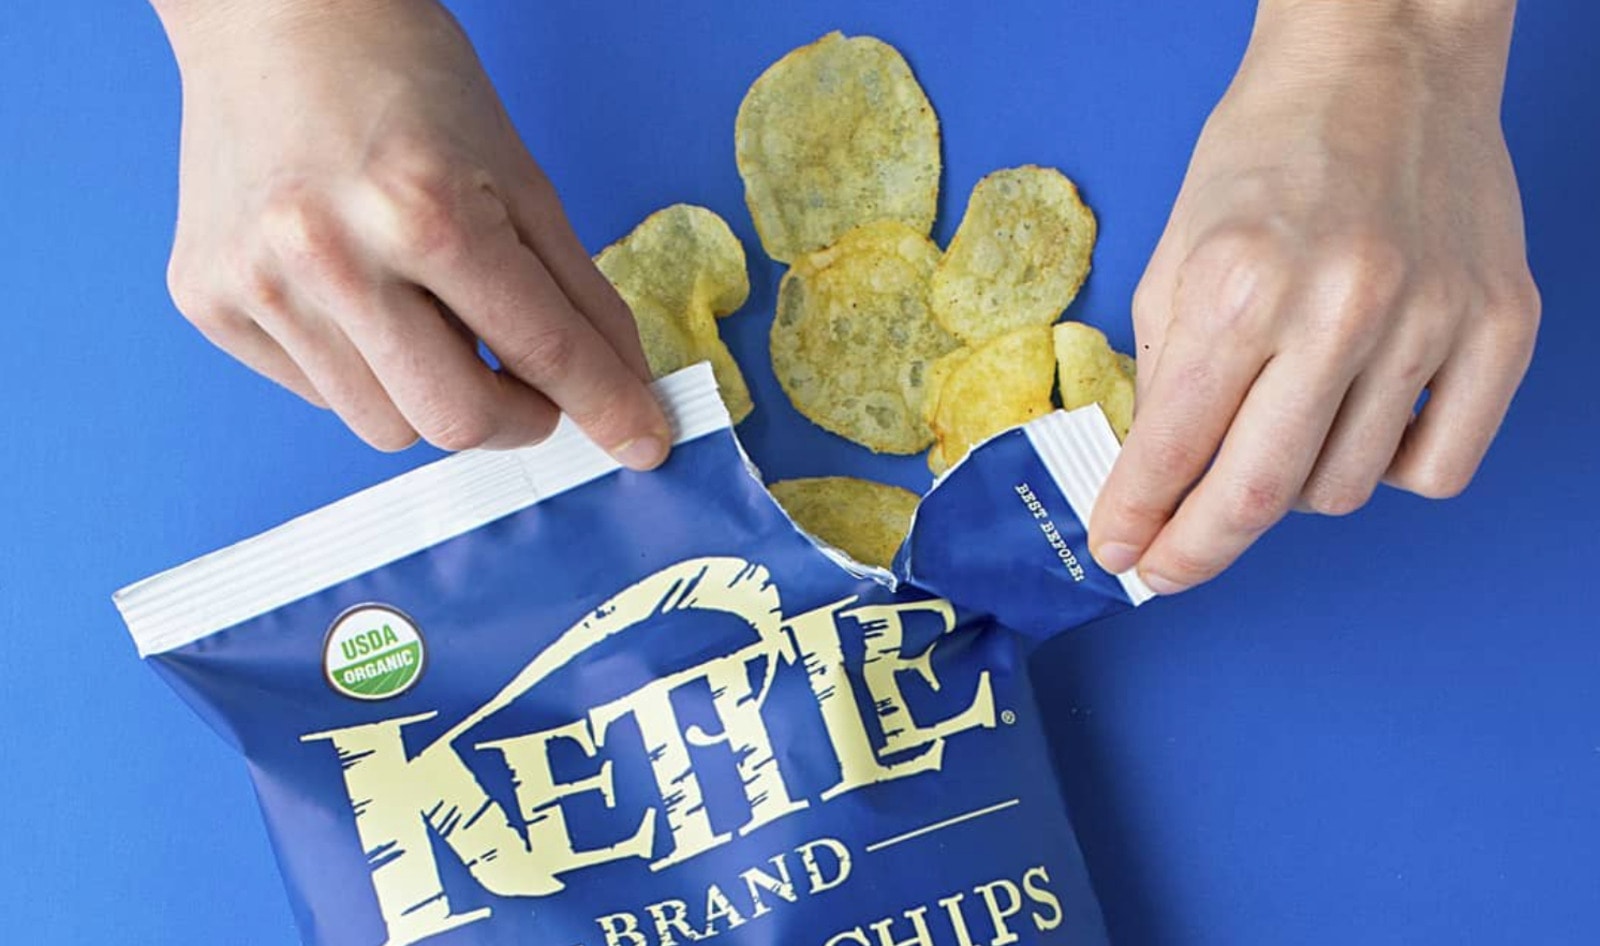 These 8 Kettle Chip Flavors Are Deliciously Dairy-Free